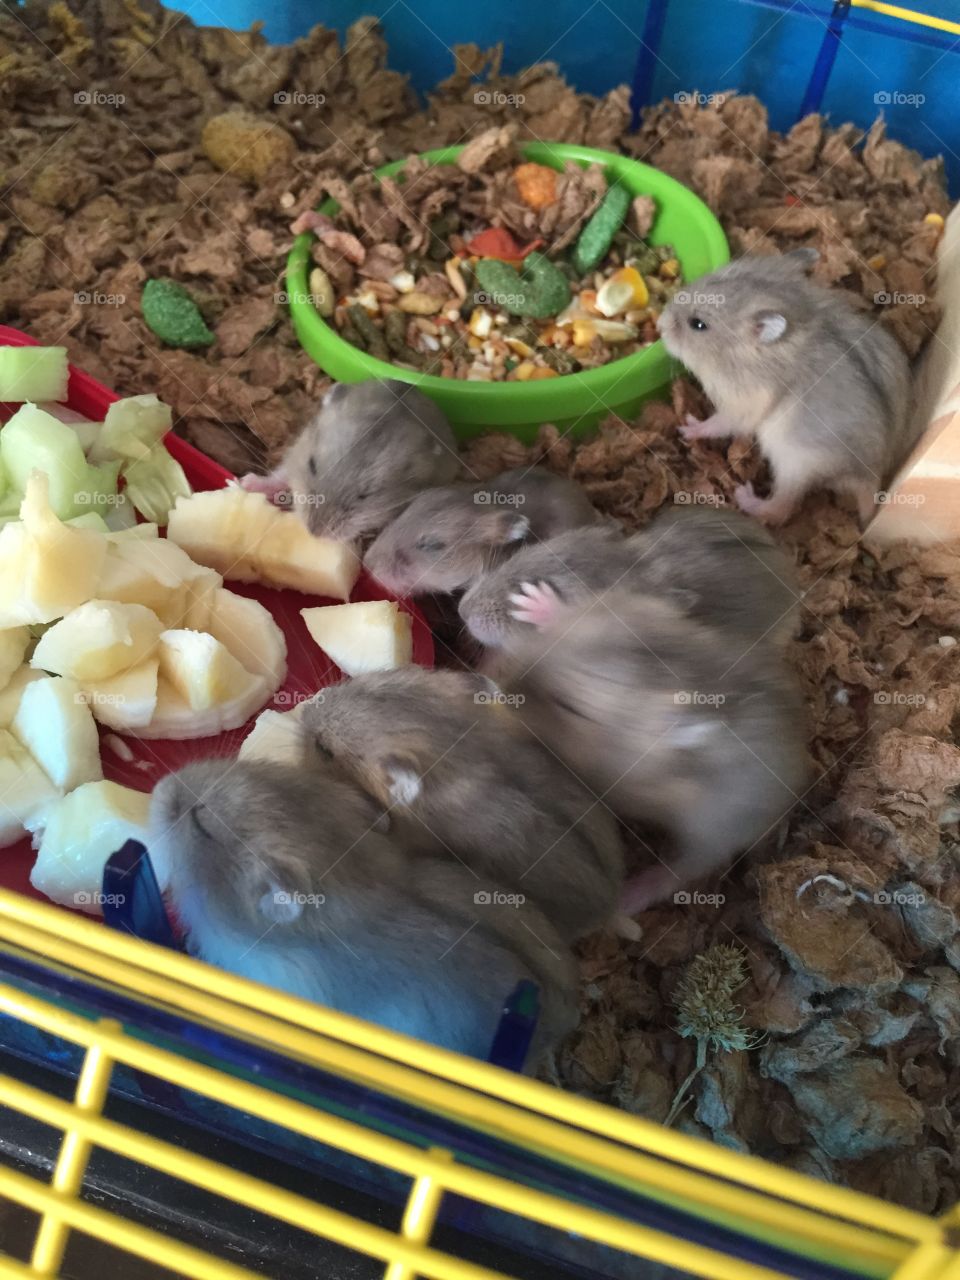 Having a snack. These little pups love bananas and cucumbers